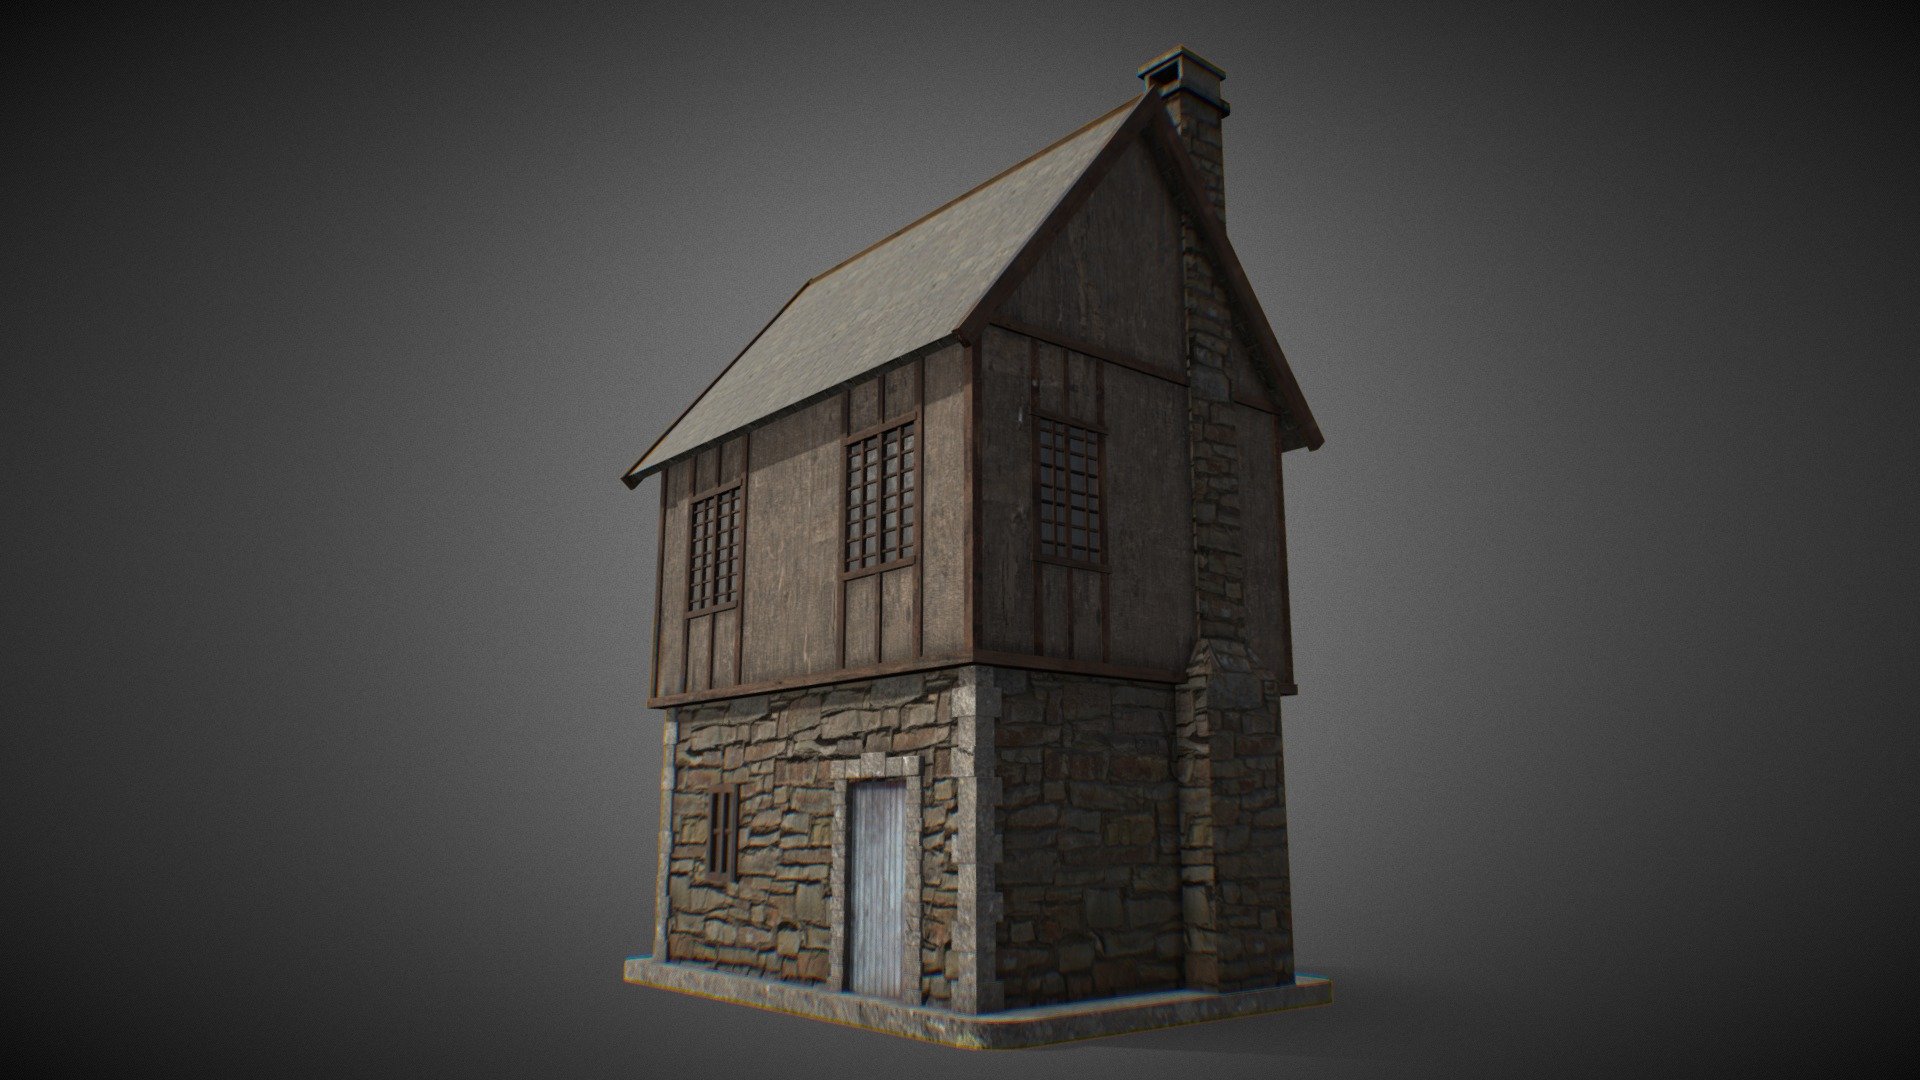 Medieval House made in Blender with Bake UV Maps


Also accept modeling commission. Feel free to contact me by email: MARKALLA2013@GMAIL.COM if any questions or anything here interests you~
YouTube  @Casisiman2013
Instagram  @alladigitalart
Artstation https://www.artstation.com/markalla9

*Every like, comment, and follow will support me to go further! - Medieval House - Buy Royalty Free 3D model by Mark A93 (@marka93) 3d model